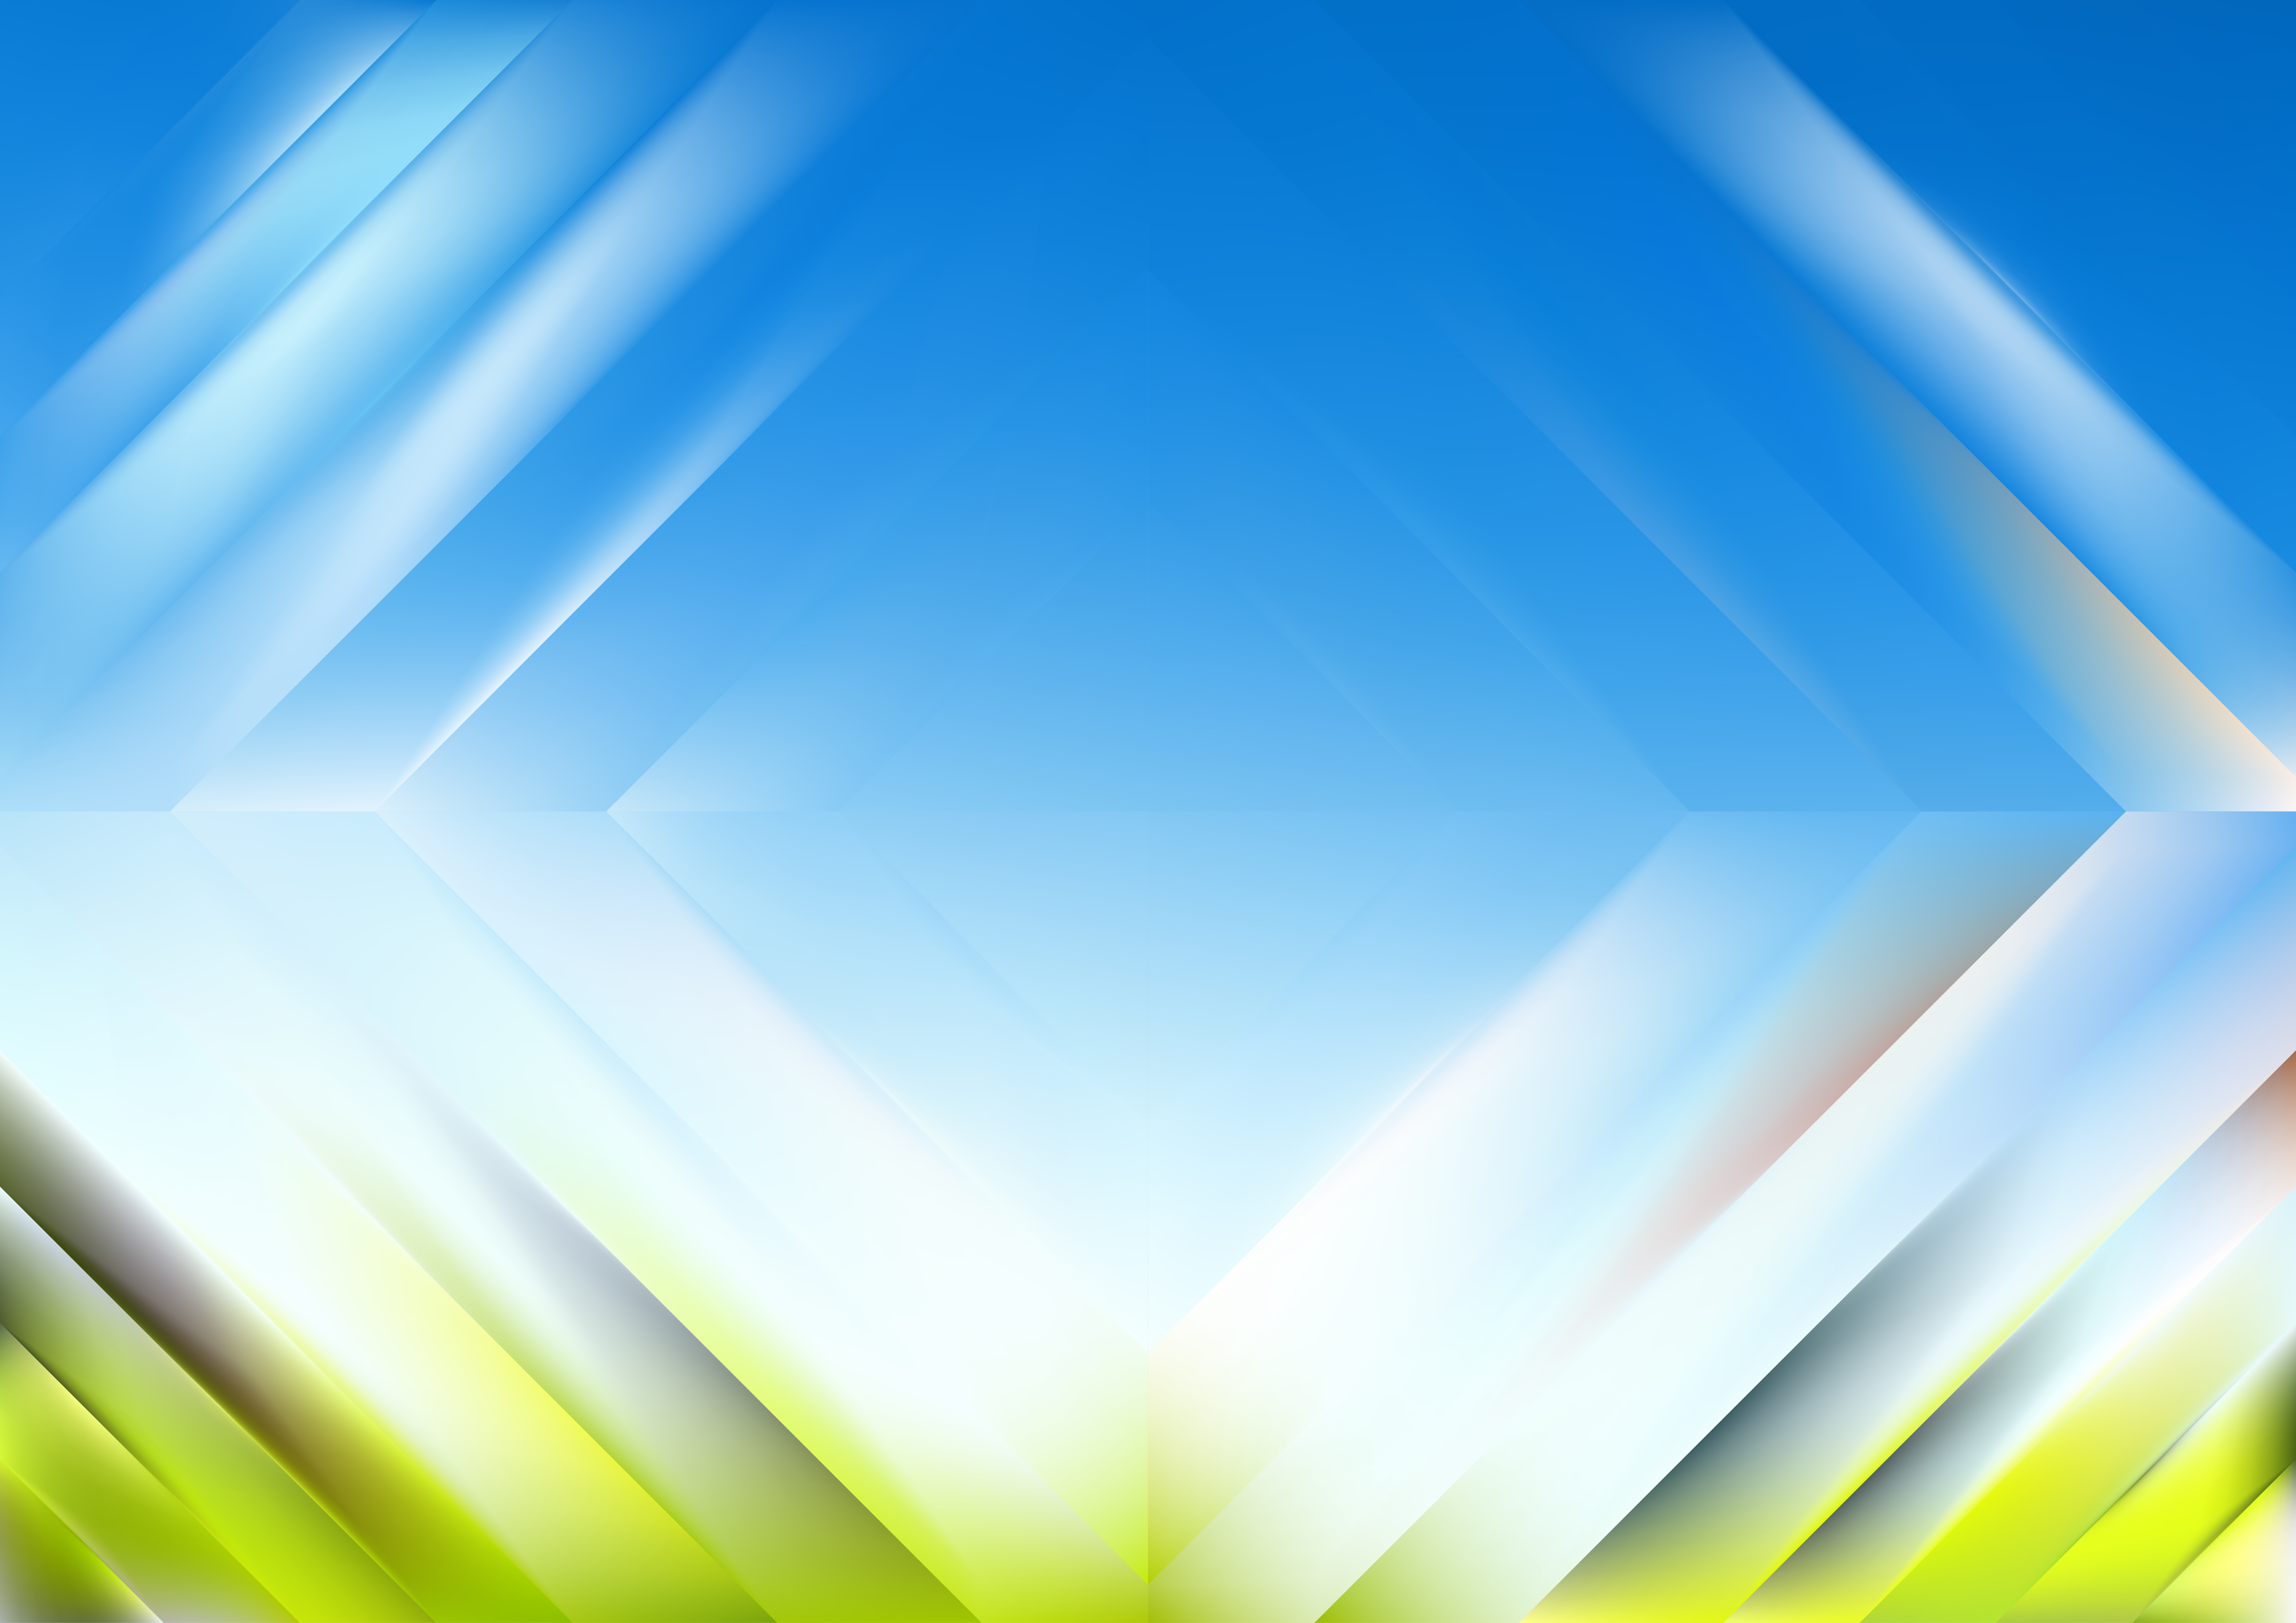 Free Blue Green and White Abstract Graphic Background Image